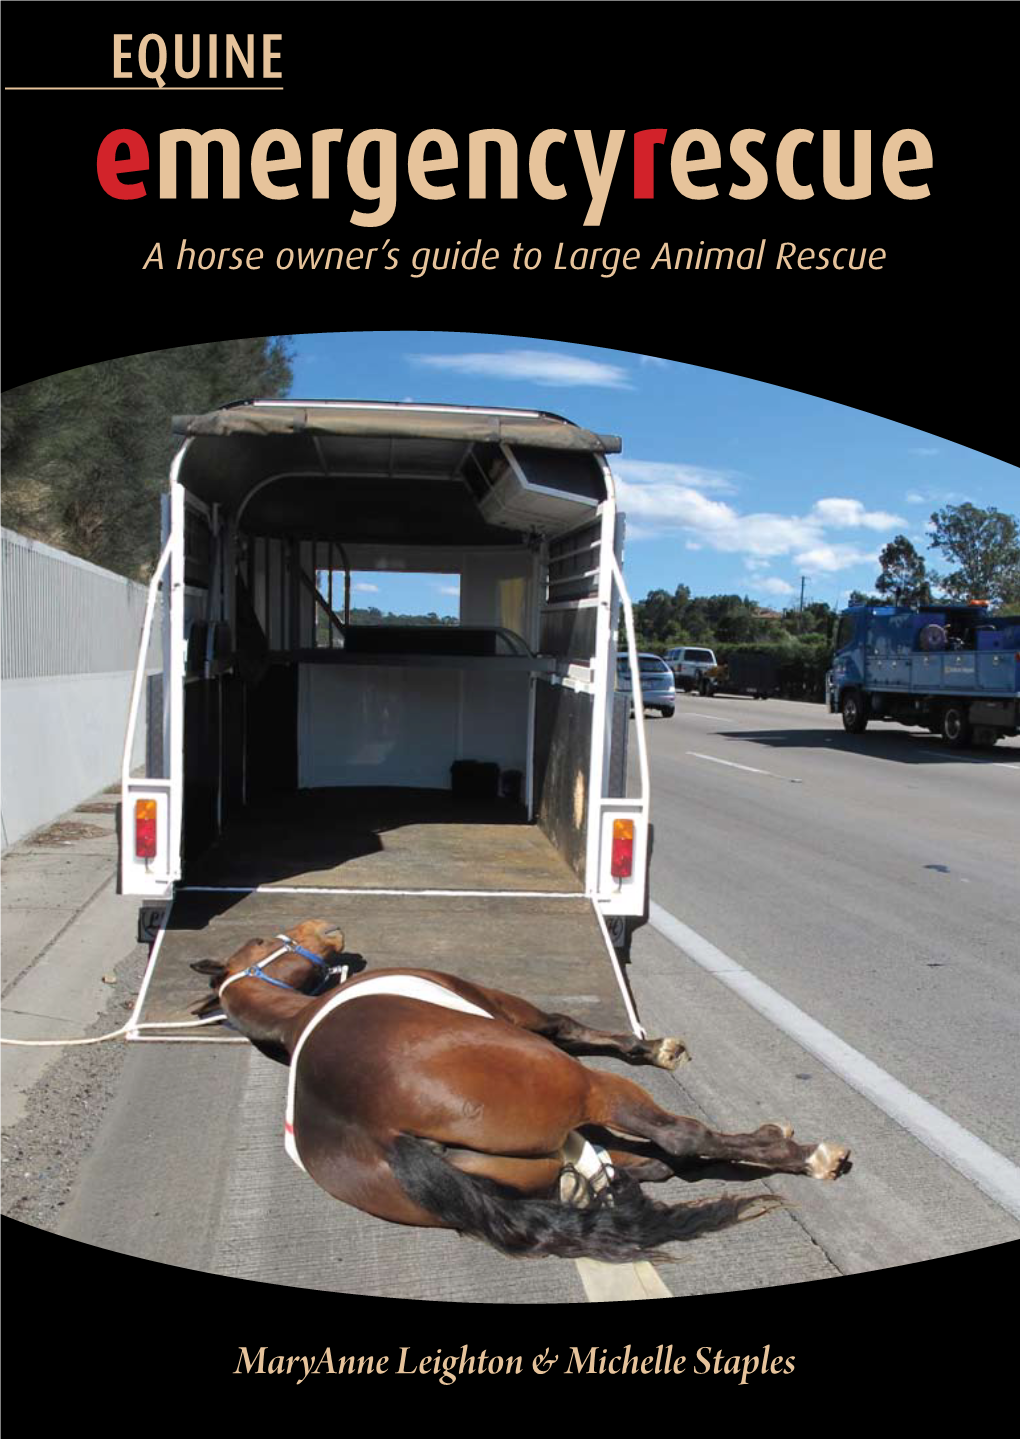 Maryanne Leighton & Michelle Staples a Horse Owner's Guide to Large Animal Rescue Emergencyrescue